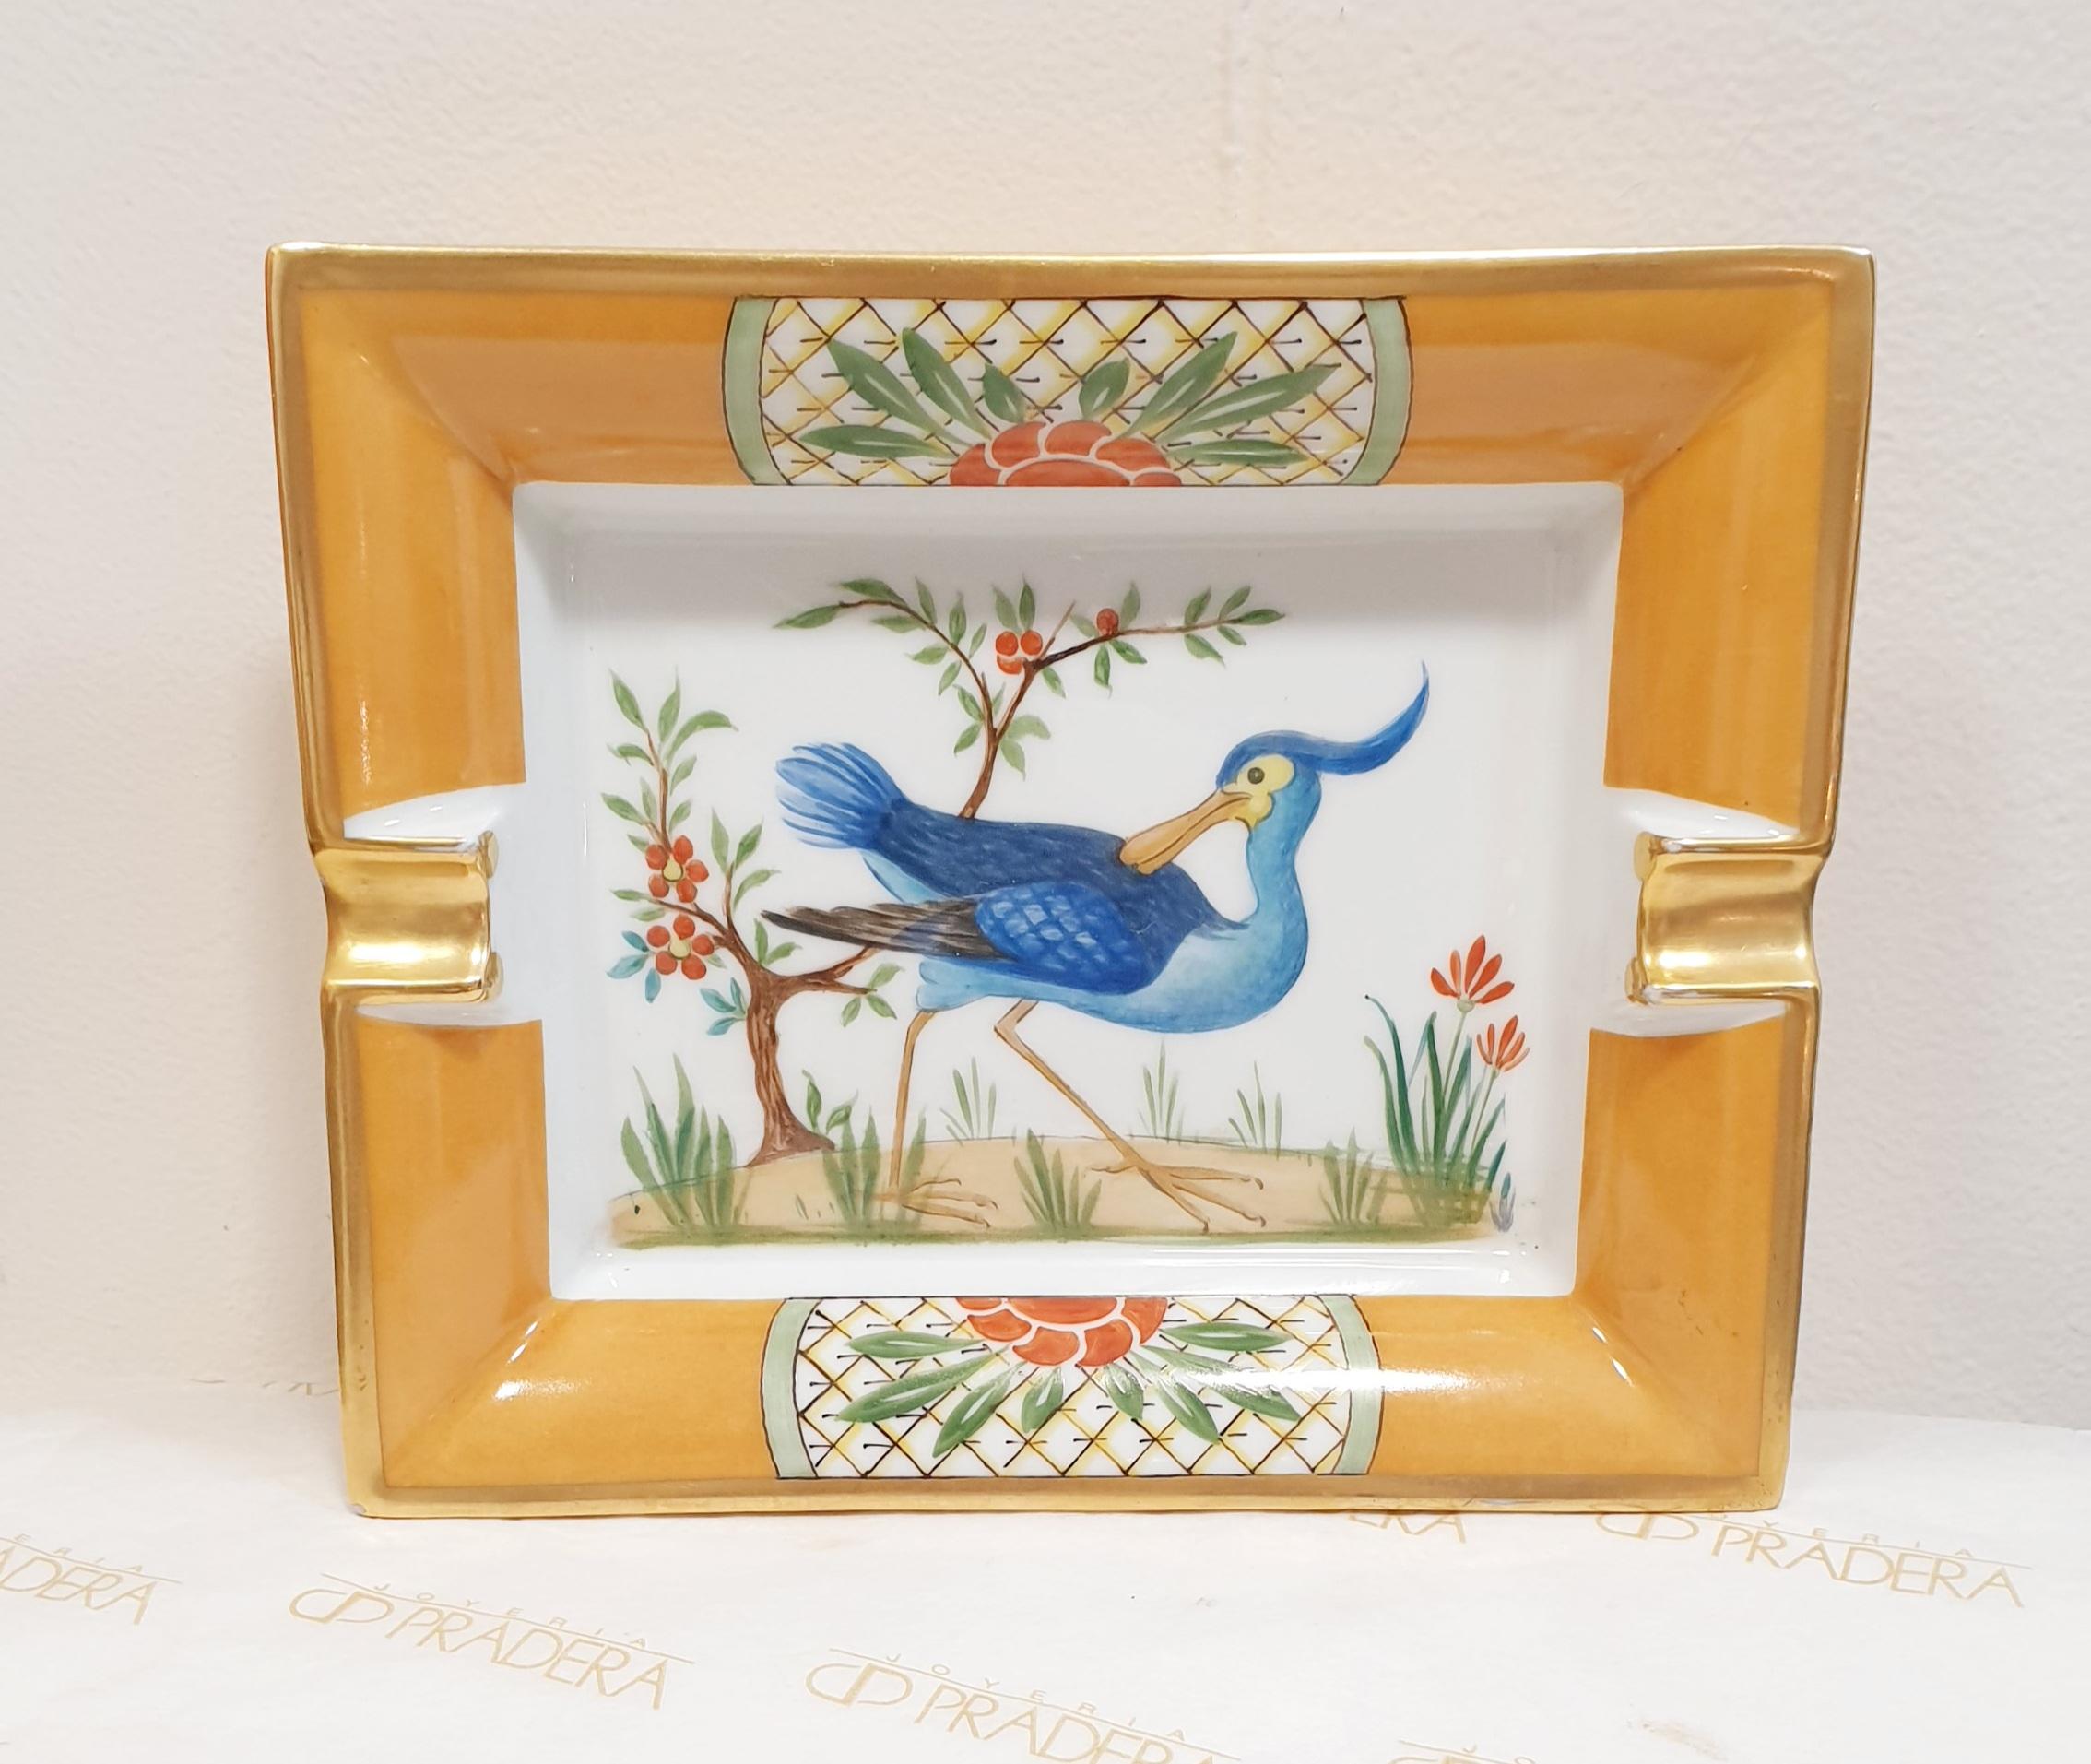 Hermès French Ceramic Ashtray. Vintage design
A ceramic Hermes ashtray, made in France in the second half of the 20th century. These ashtrays have always been very collectible, especially the vintage models. This one has a nice bird theme, but at